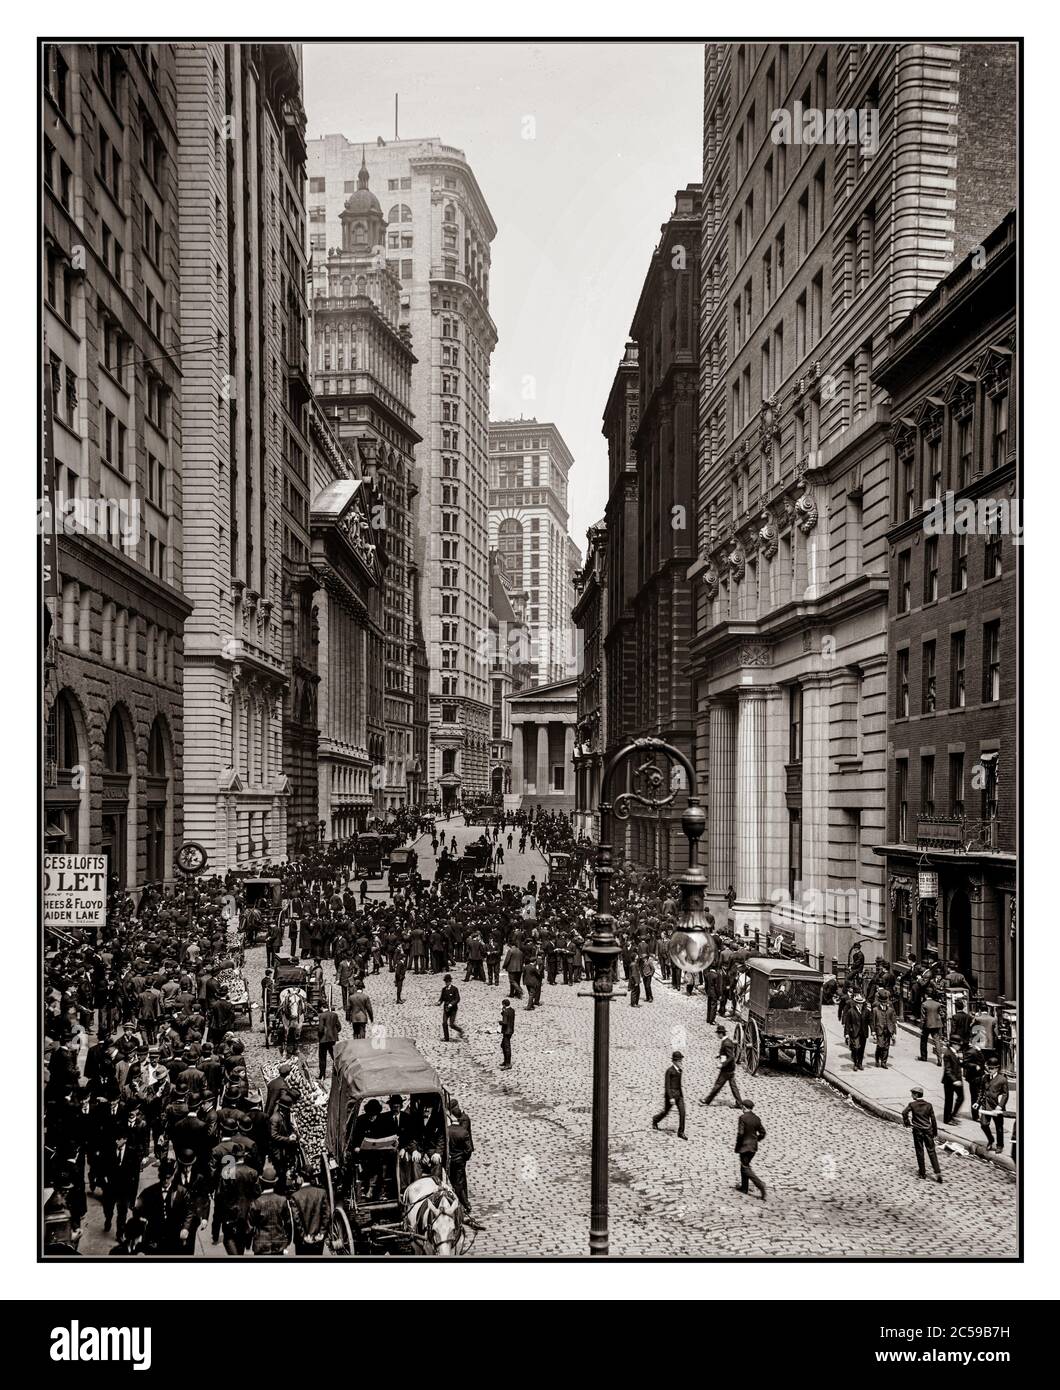 VINTAGE NEW YORK FINANCIAL DISTRICT Broad Street with Curb Exchange brokers and New York Stock Exchange, looking north towards Wall St and Federal Hall. Circa 1900. Archive Broad Street Manhattan New York USA 1900’s Stock Photo